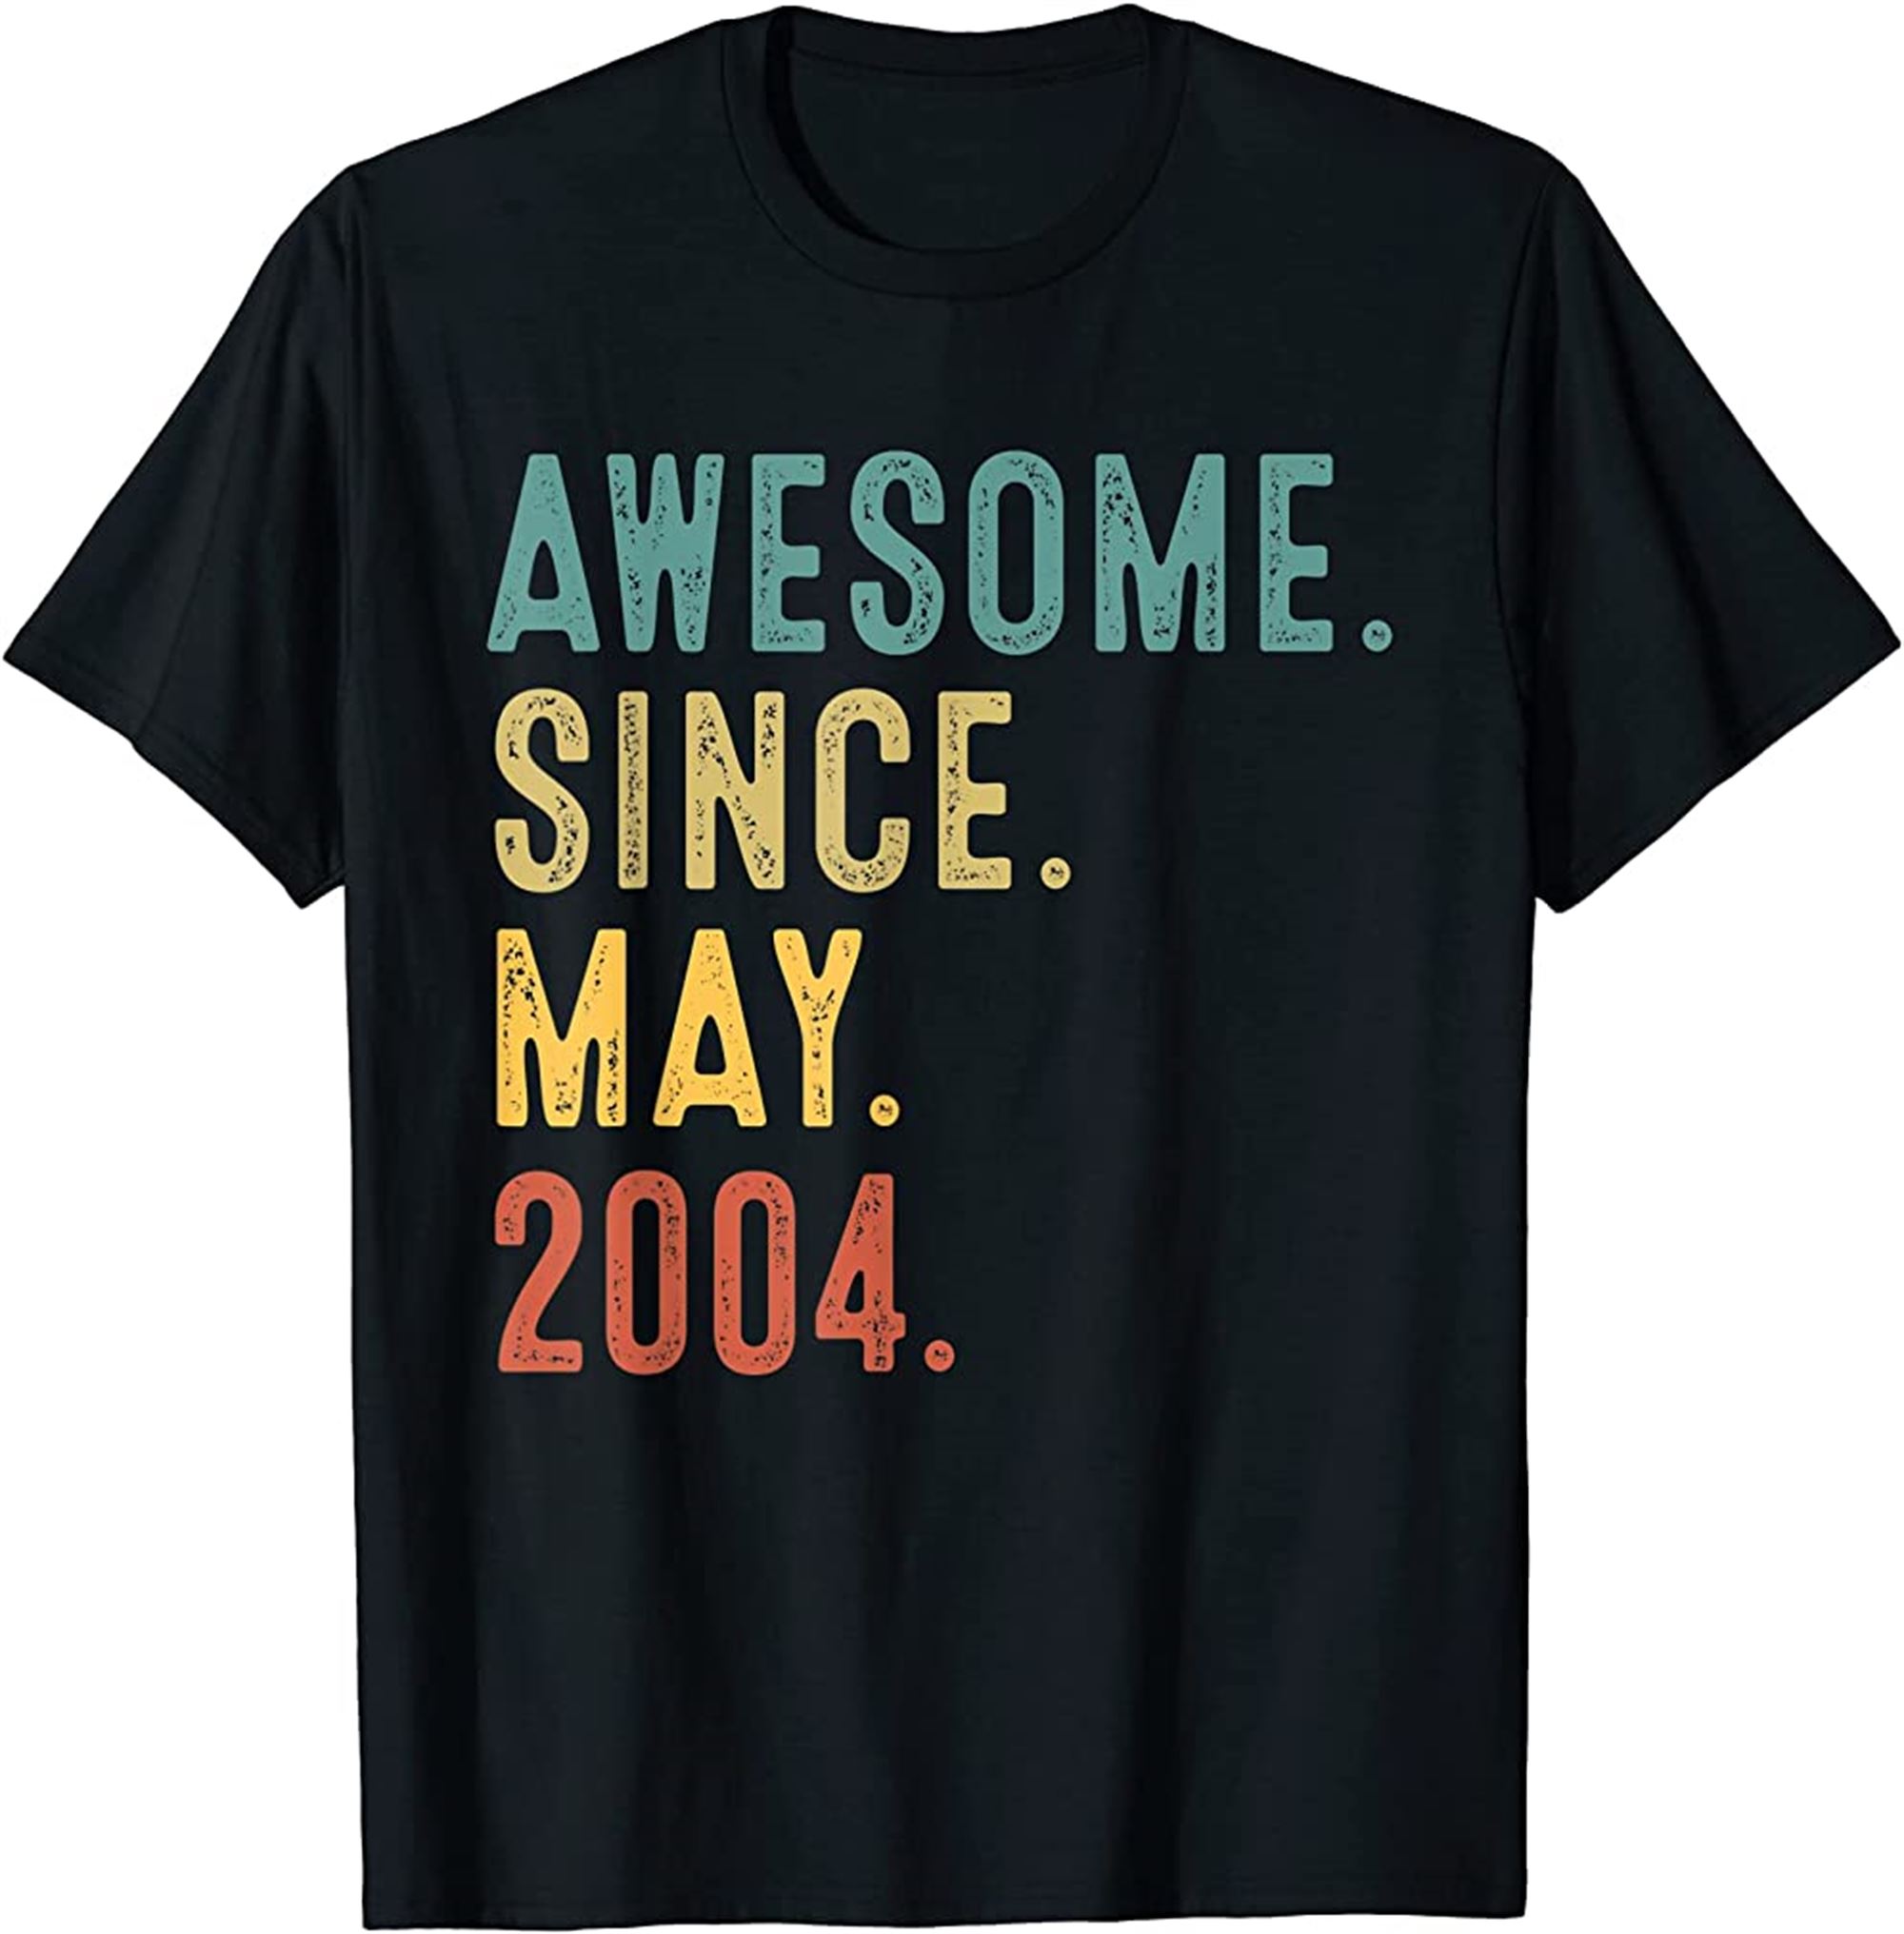 18 Years Old Gifts Awesome Since May 2004 18th Birthday T-shirt Size Up To 5xl